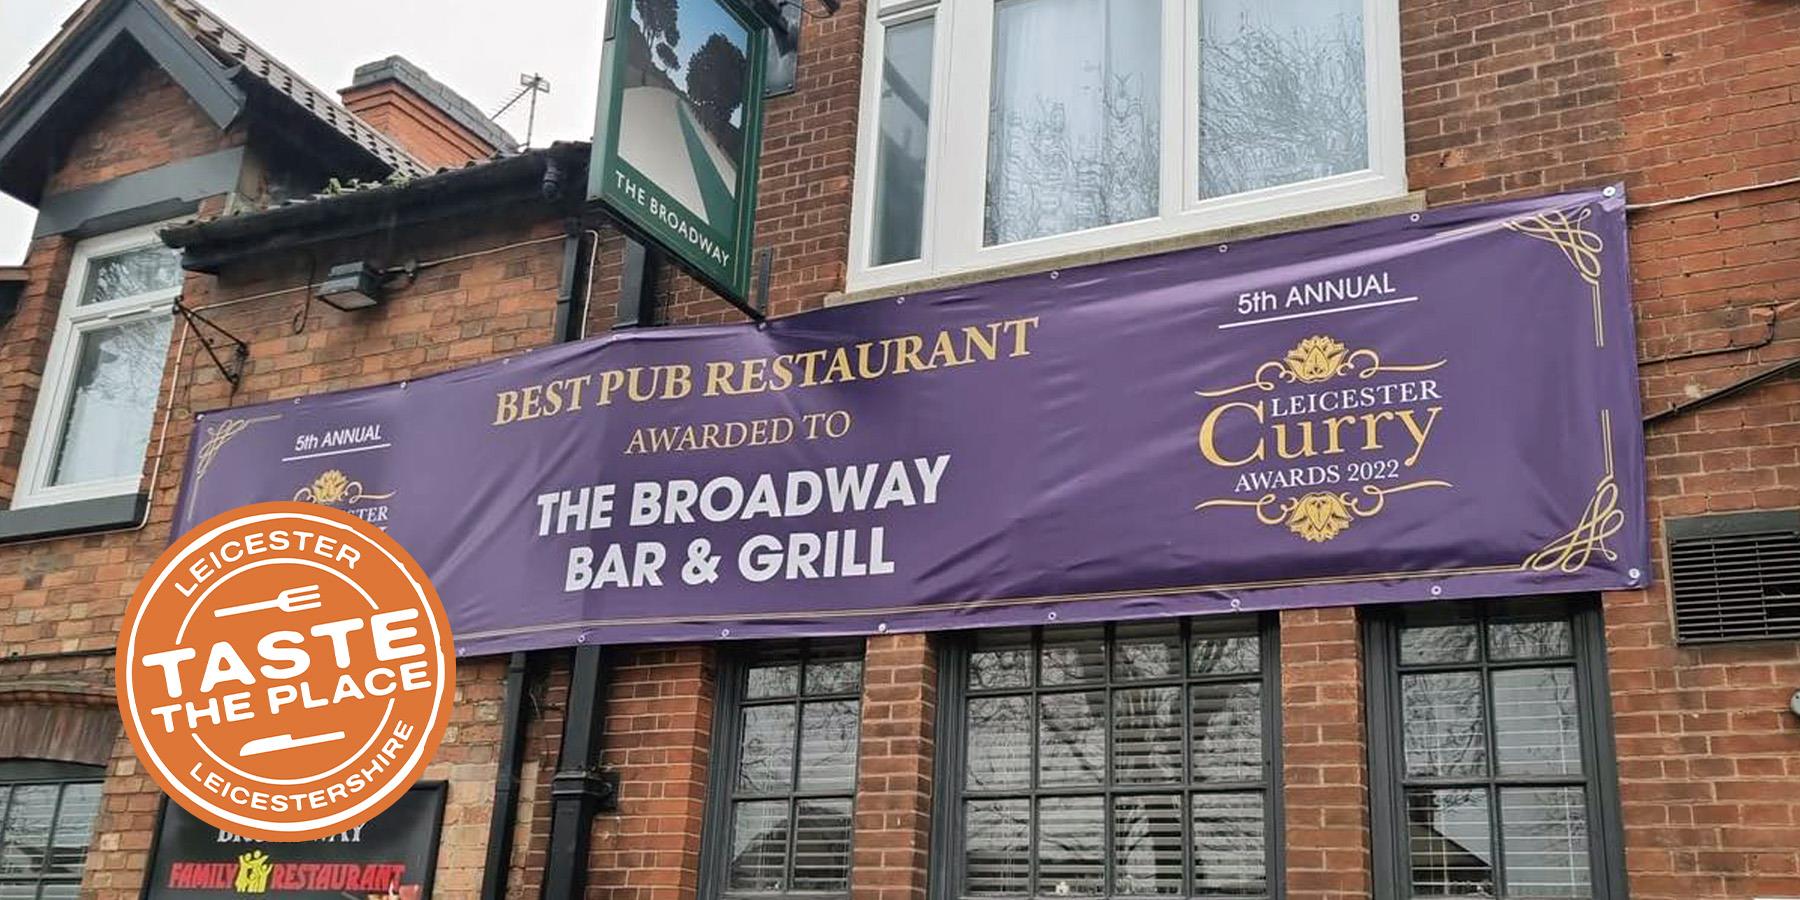 The Broadway Bar & Grill
